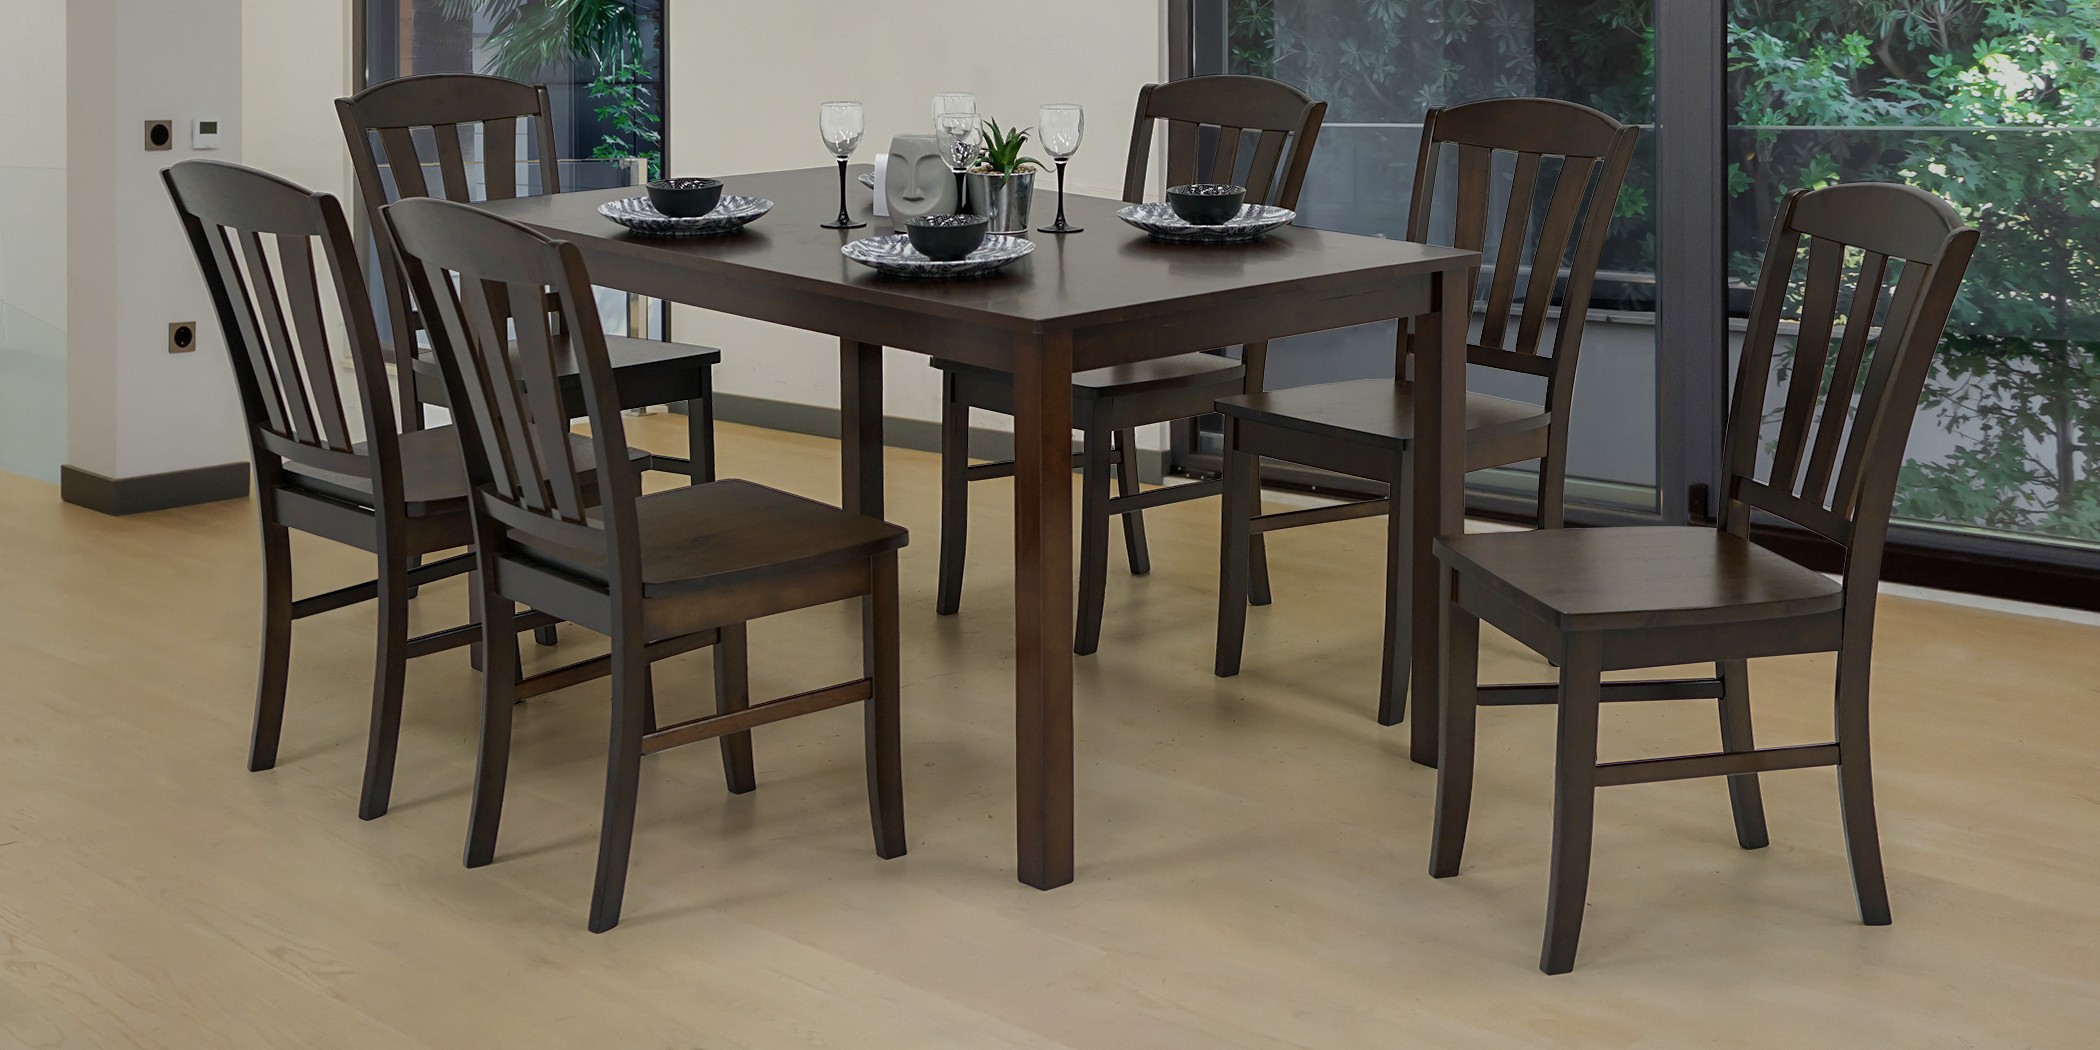 Danbury Table and 6 Chairs W/Wooden Seat Wenge Col